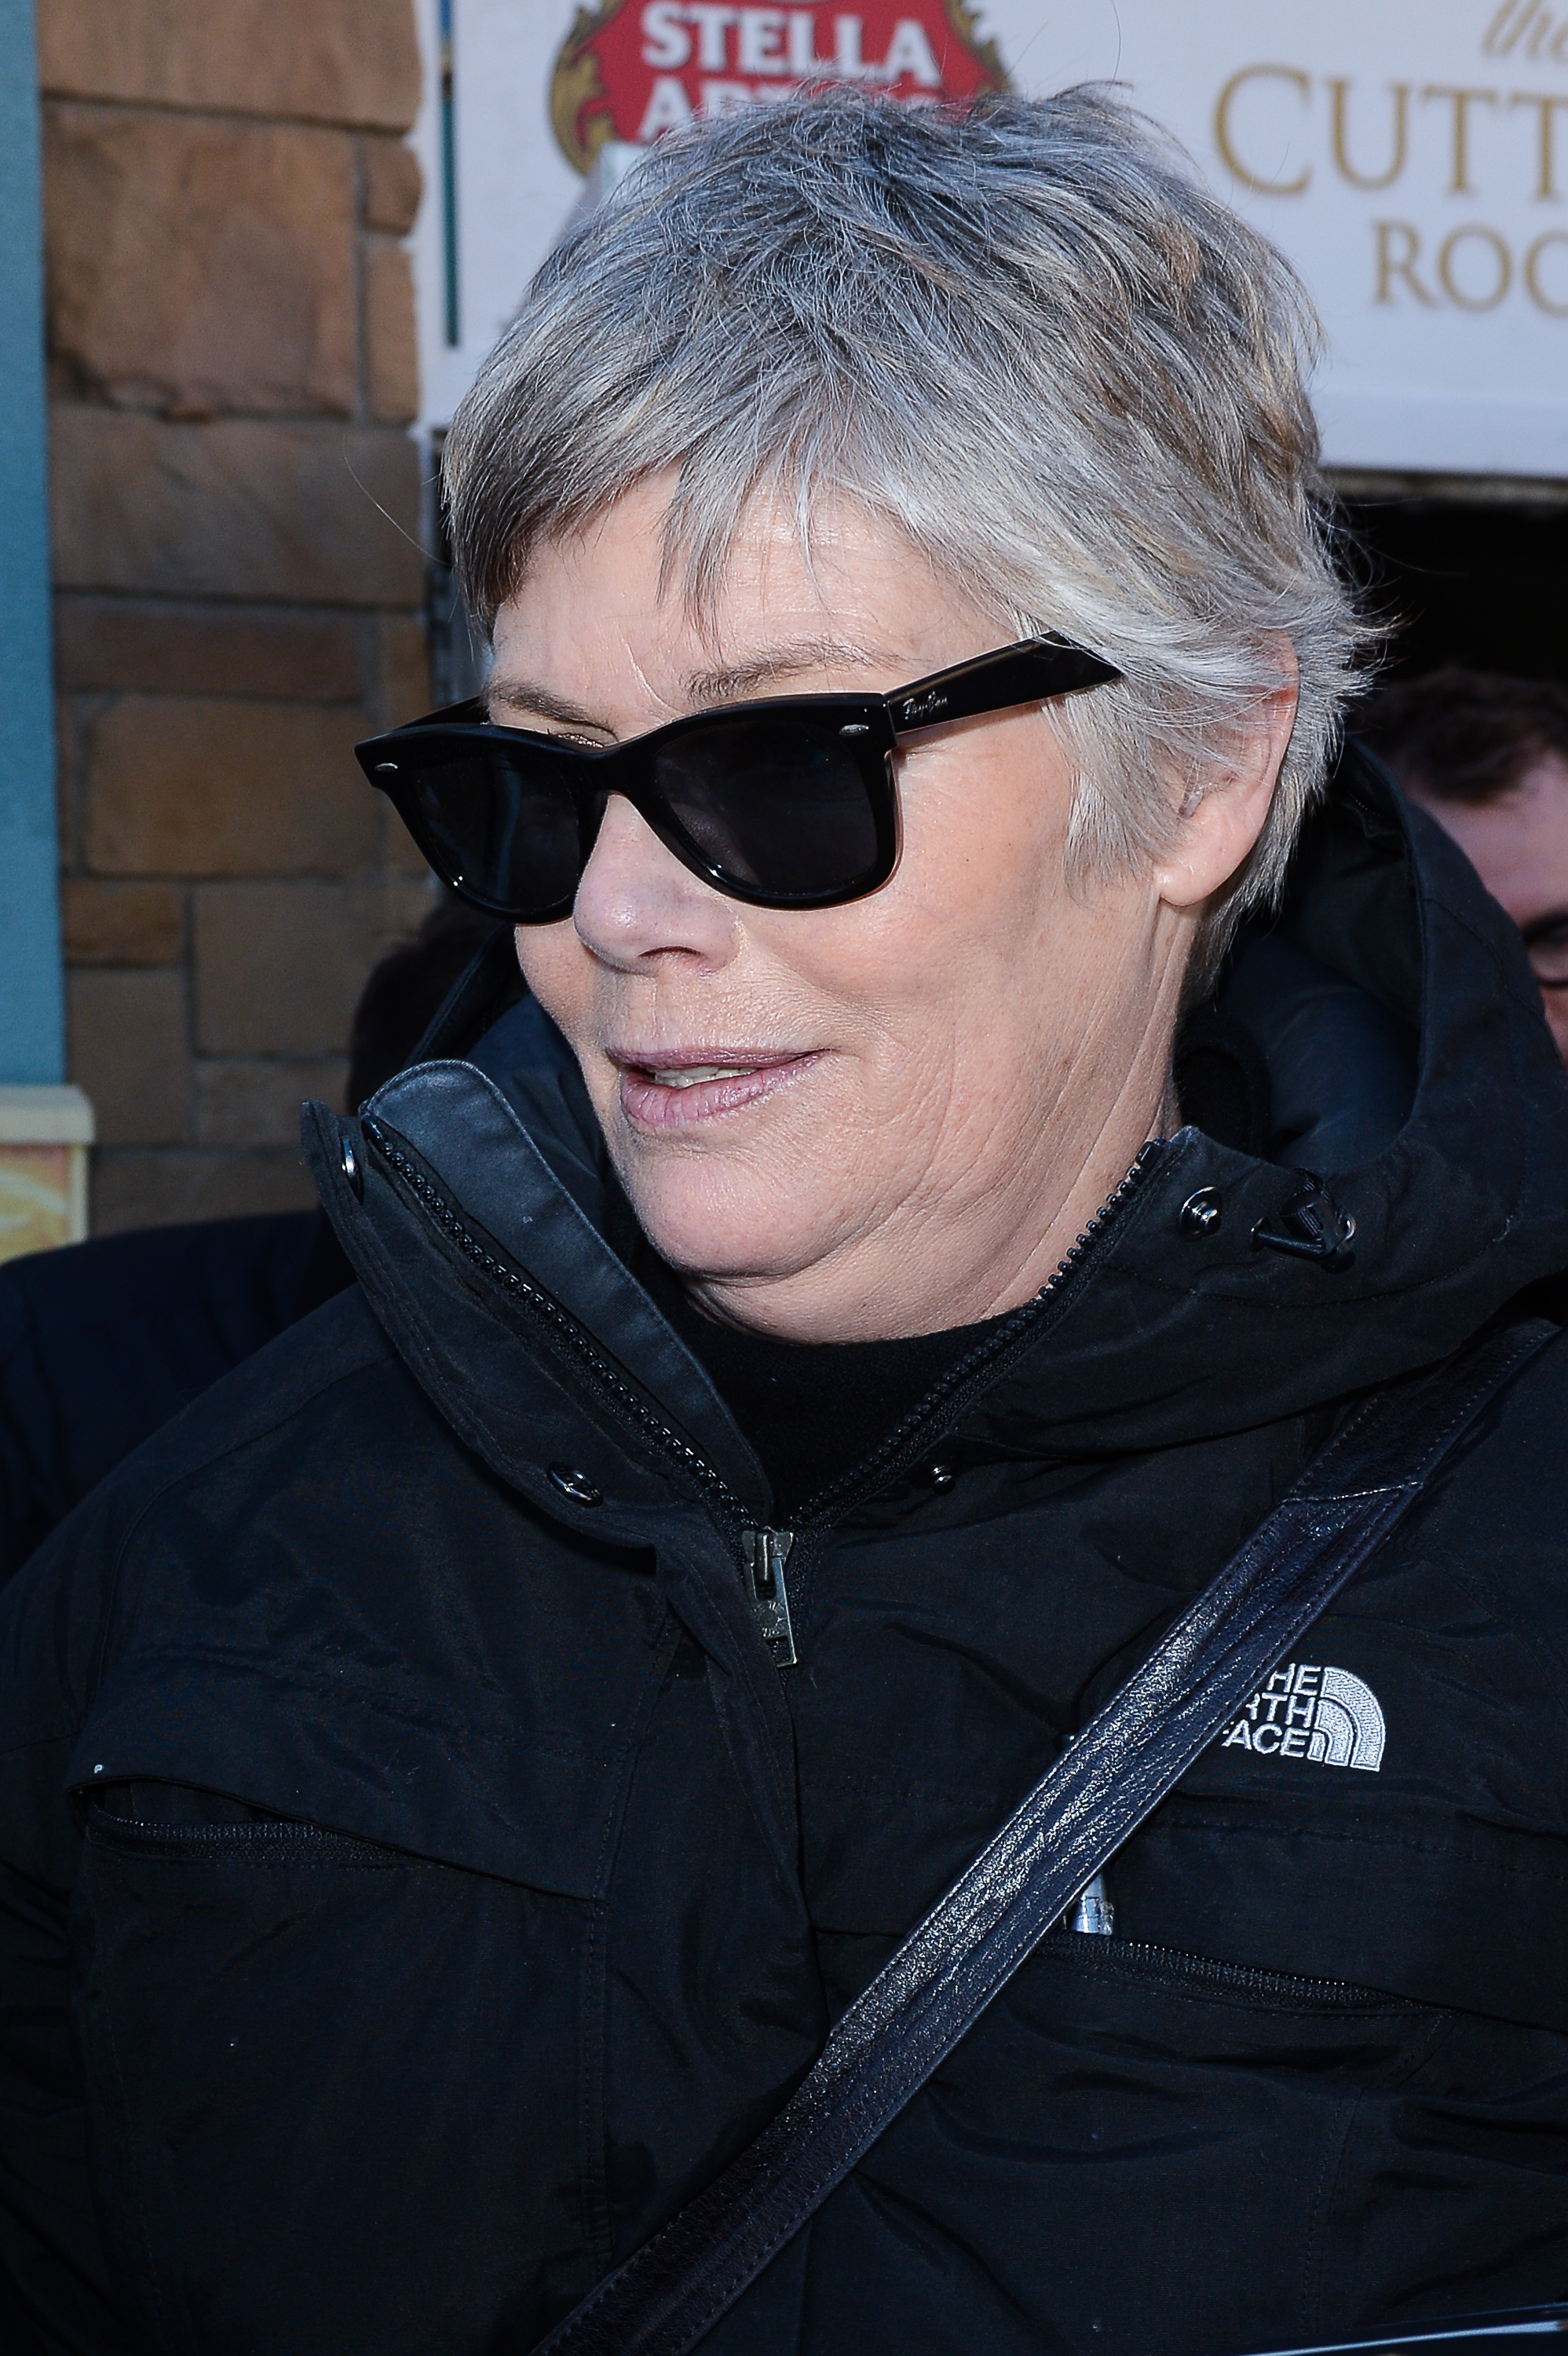 The former Hollywood star spotted on January 19, 2013, in Park City, Utah. | Source: Getty Images